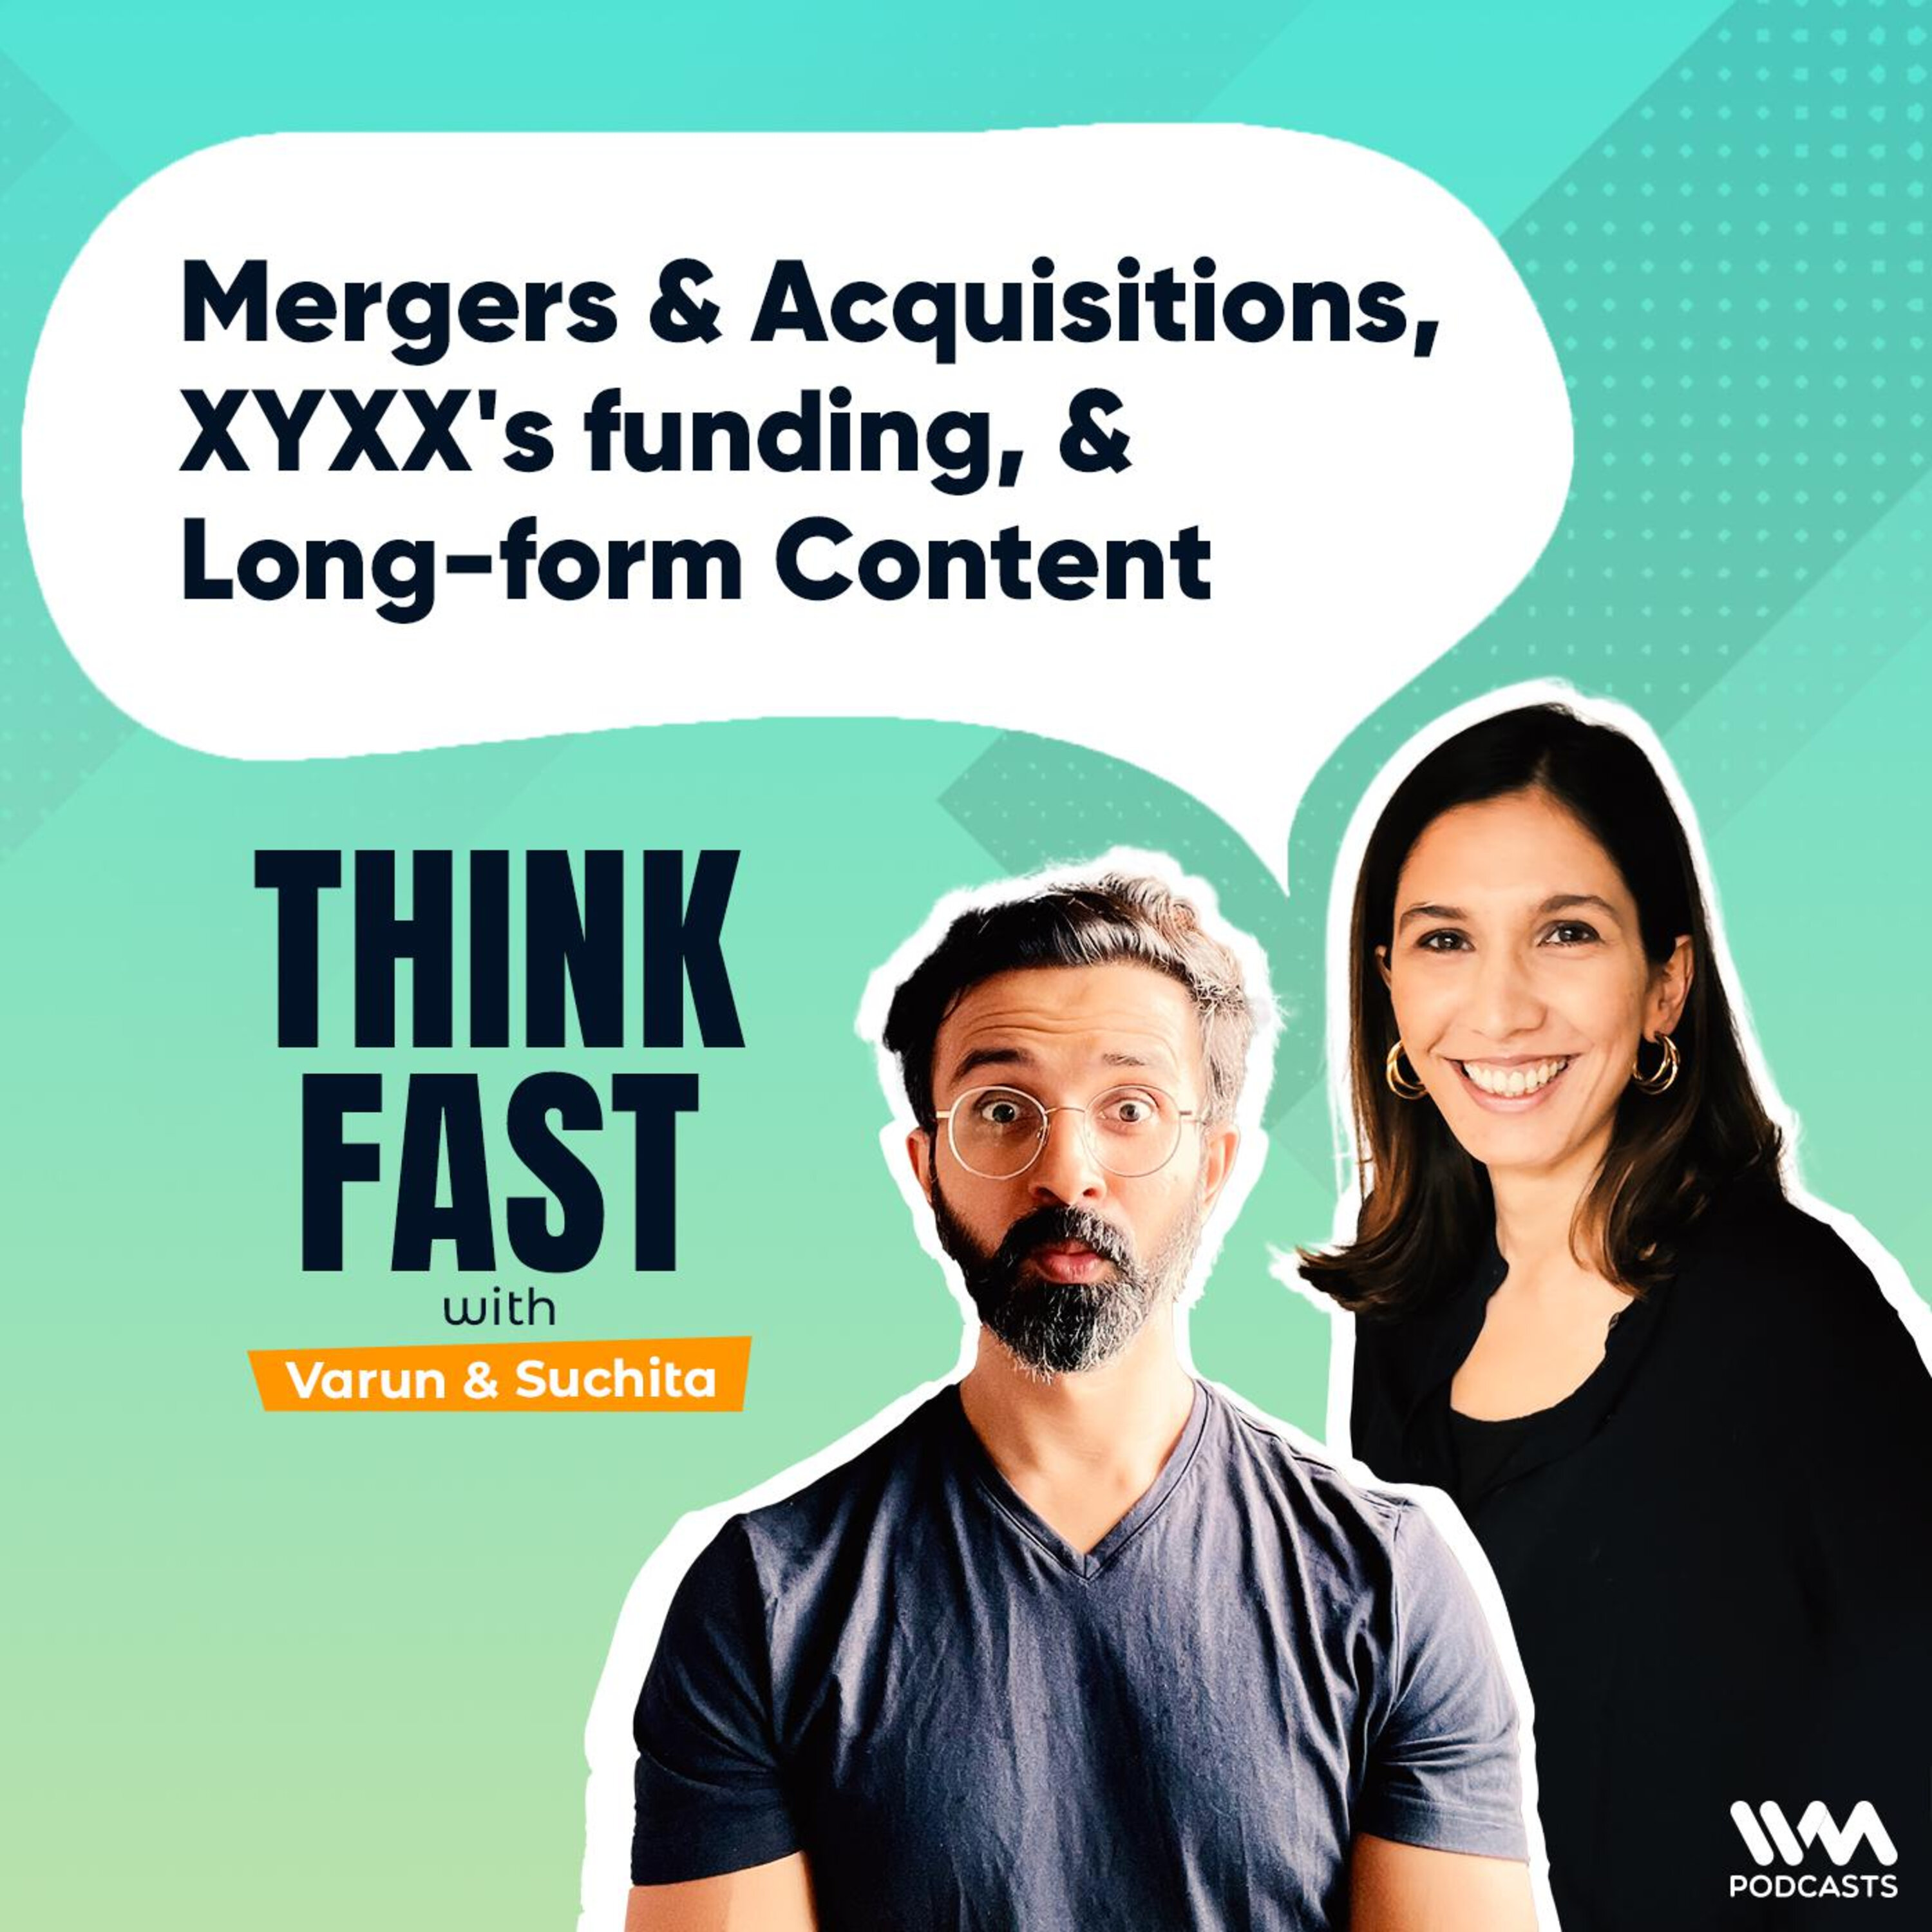 Mergers & Acquisitions, XYXX’s funding, & Long-form Content